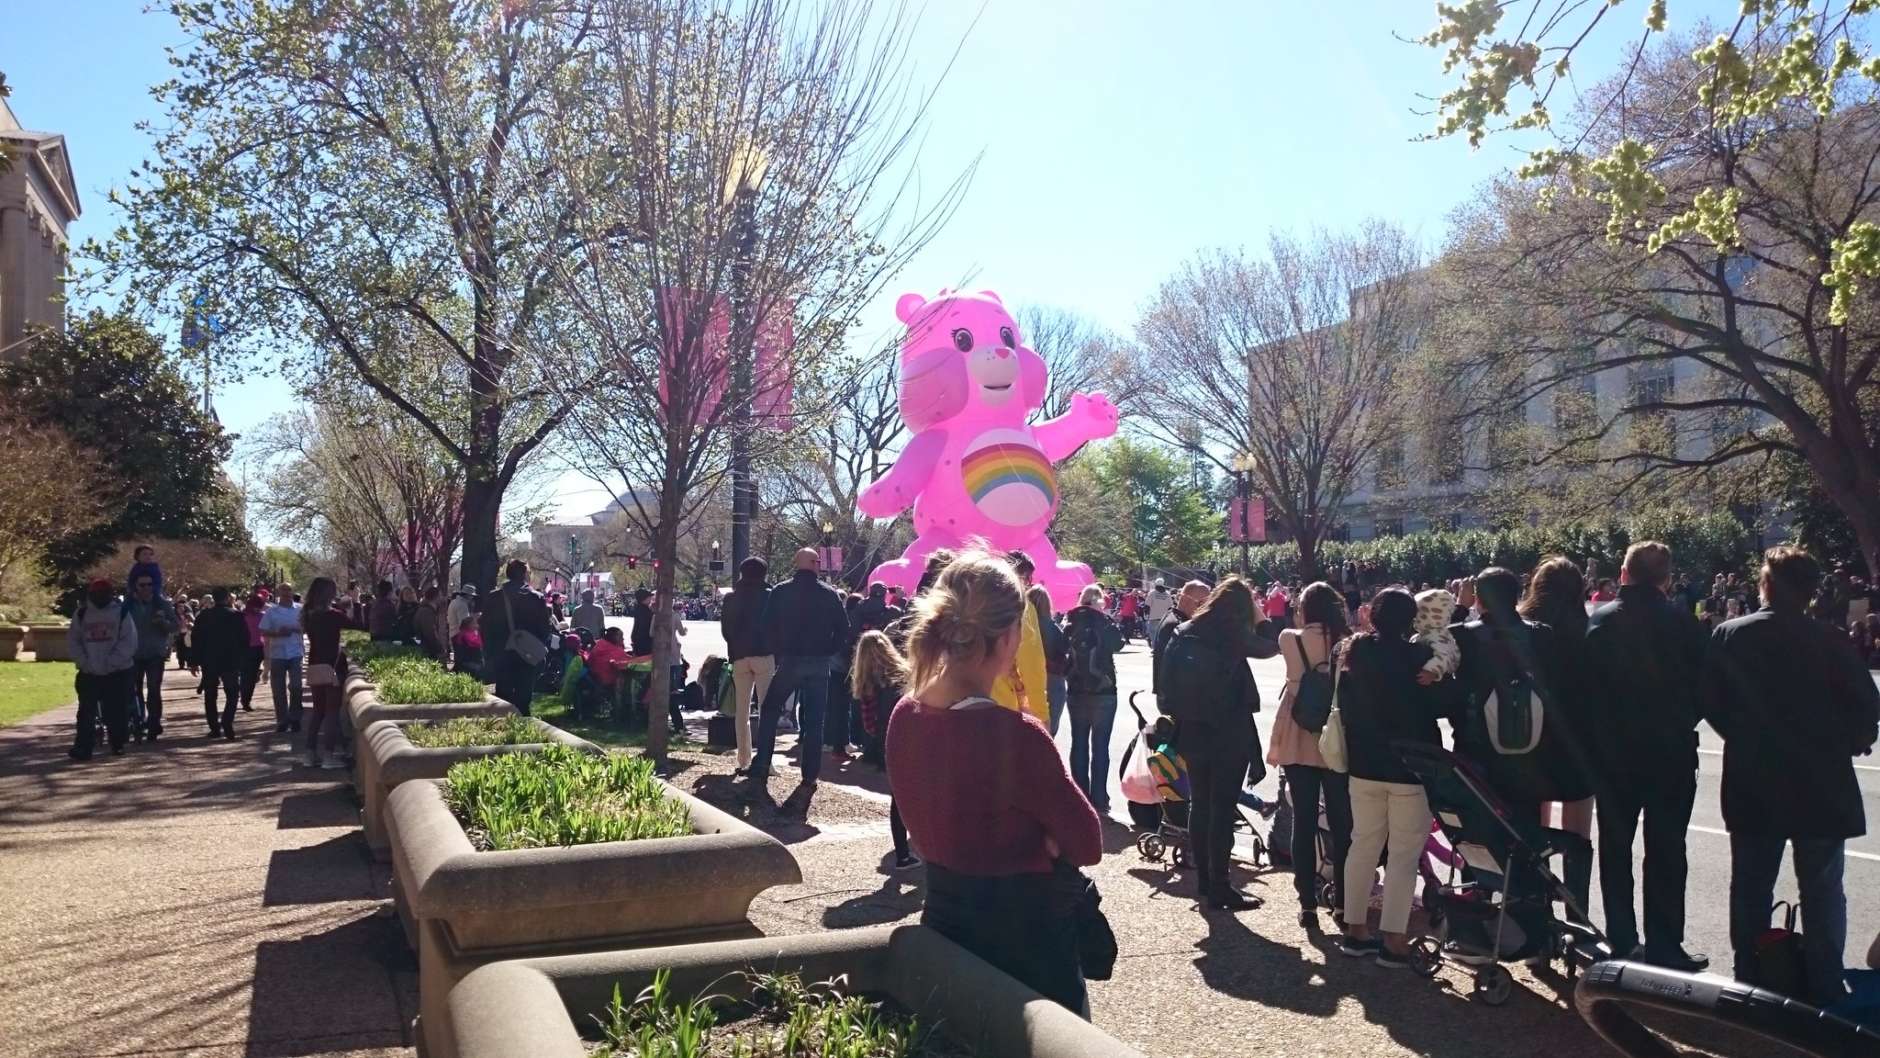 A big, pink bear was among the early floats in the 2017 National Cherry Blossom Parade. (WTOP/Dennis Foley)